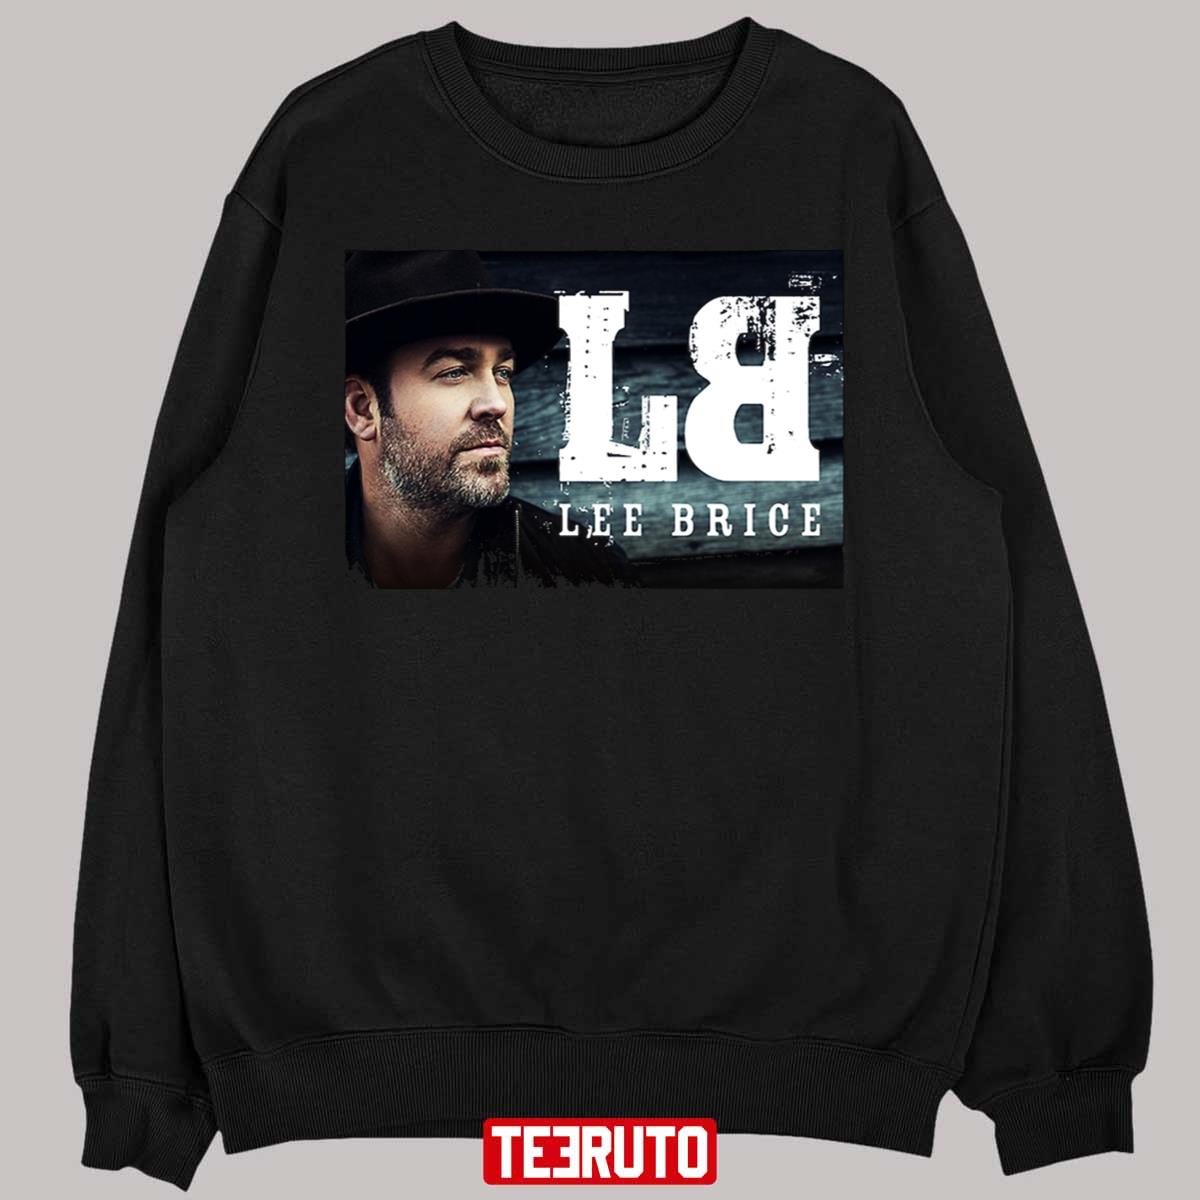 Lee Brice Collection Designs Graphic Unisex T-Shirt